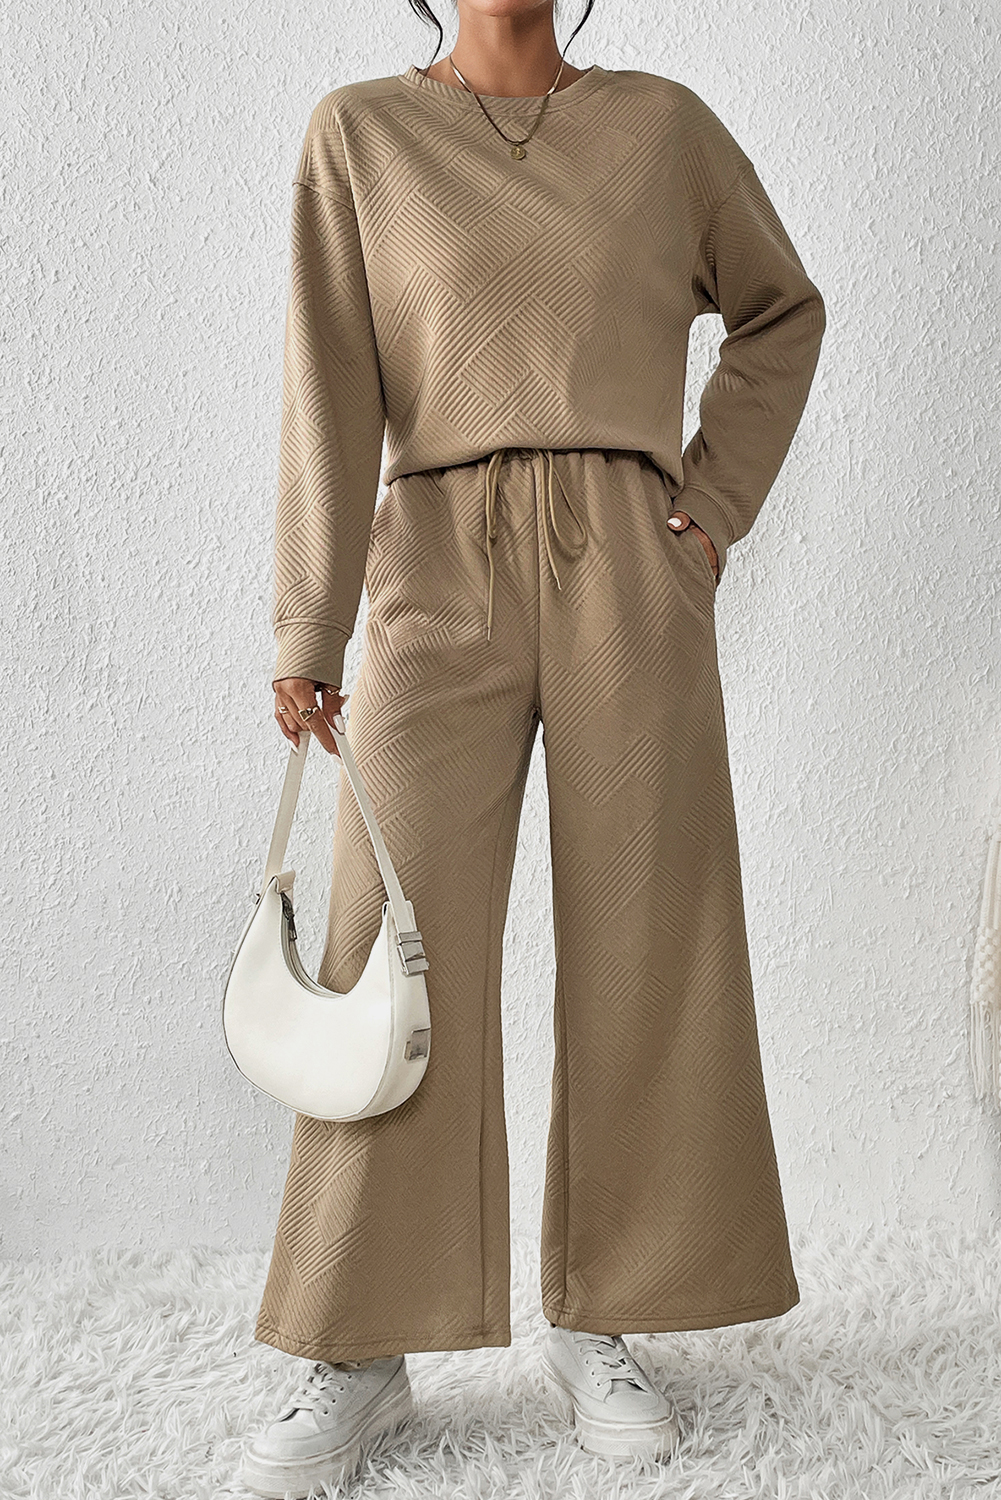 Shewin Wholesale Western Clothes Dark Khaki Textured Loose Slouchy Long Sleeve Top and PANTS Set